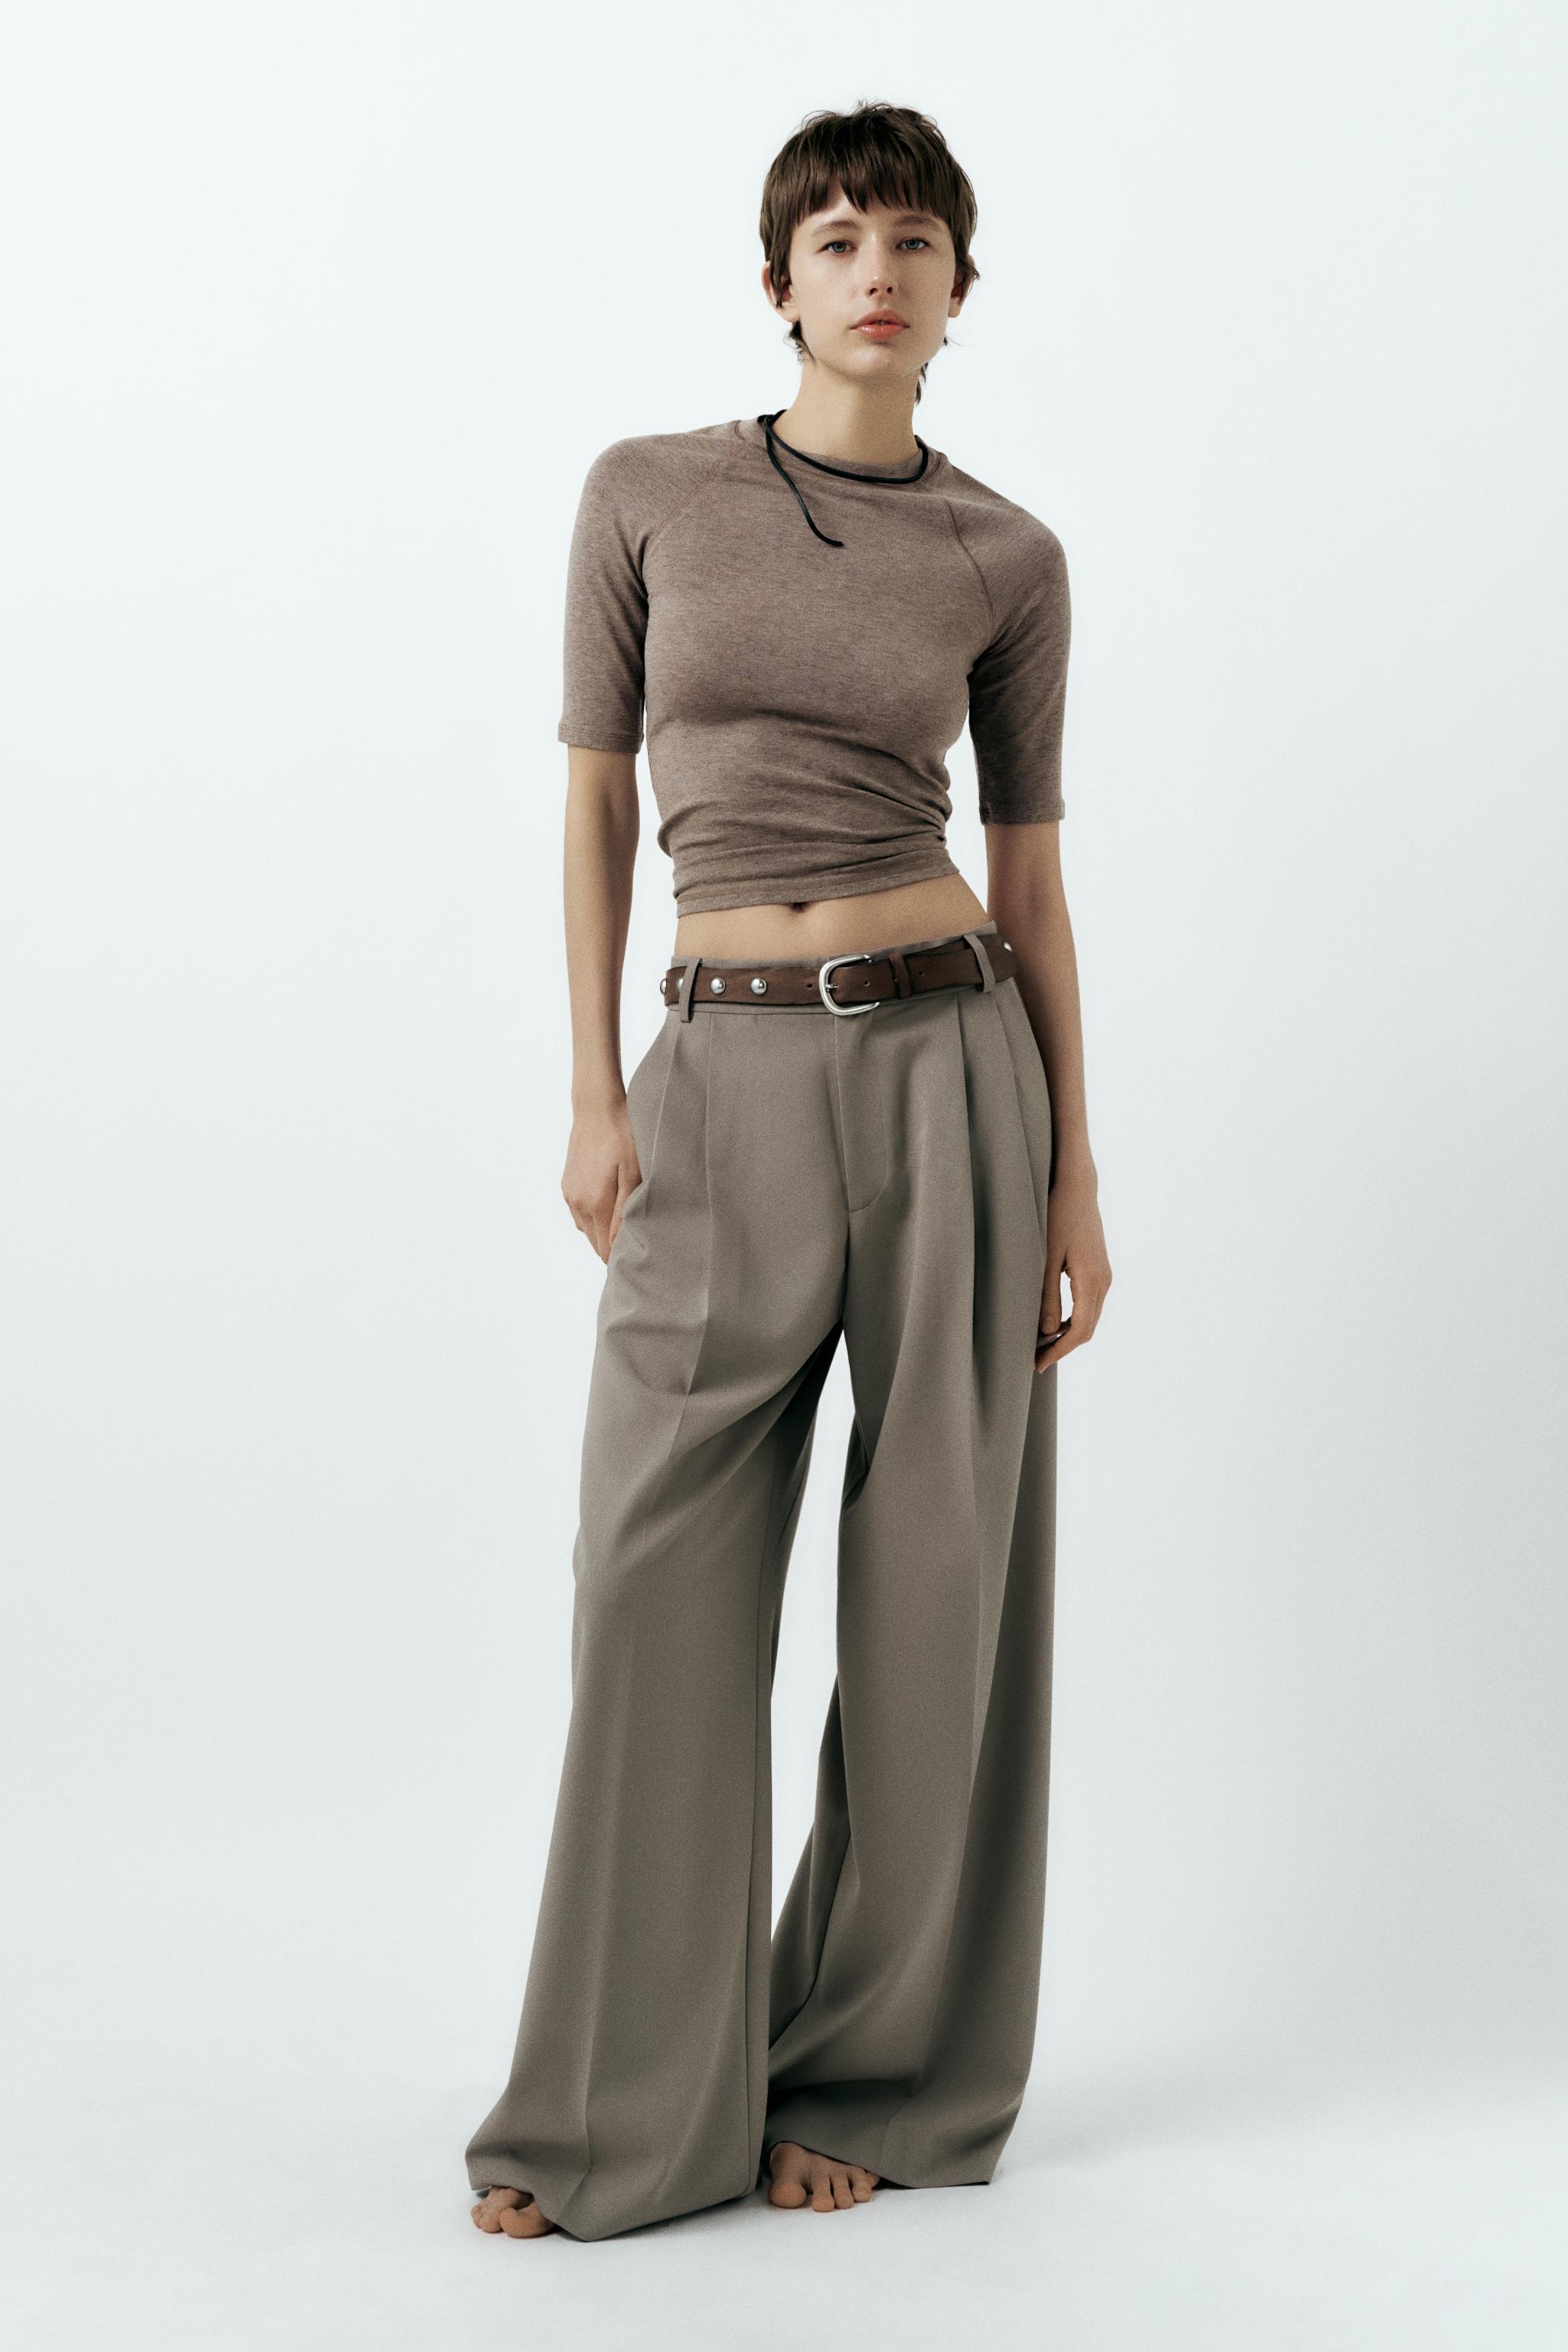 Zara Women Finely pleated palazzo trousers 9479/277/800 (Medium): Buy  Online at Best Price in UAE 